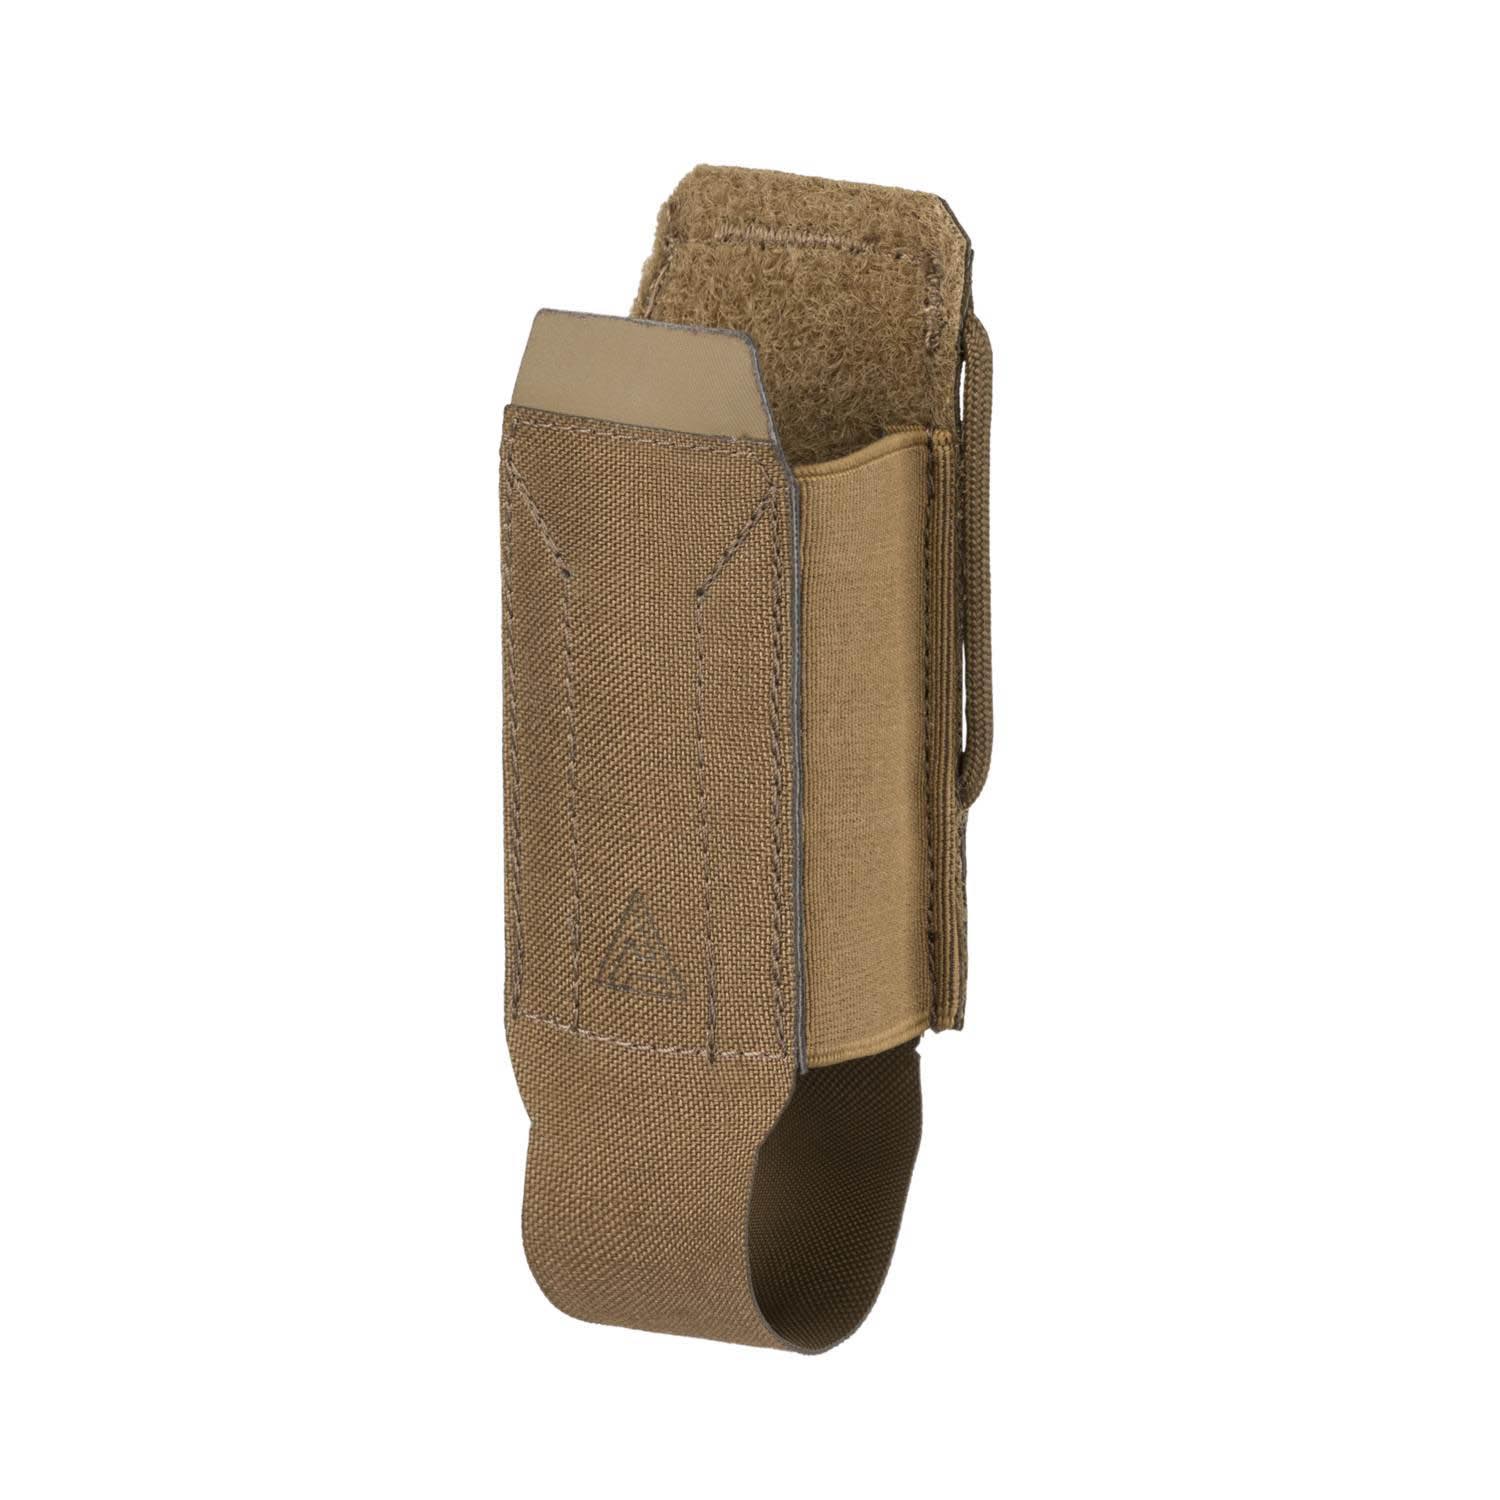 Direct Action Flashbang Pouch Open coyote brown